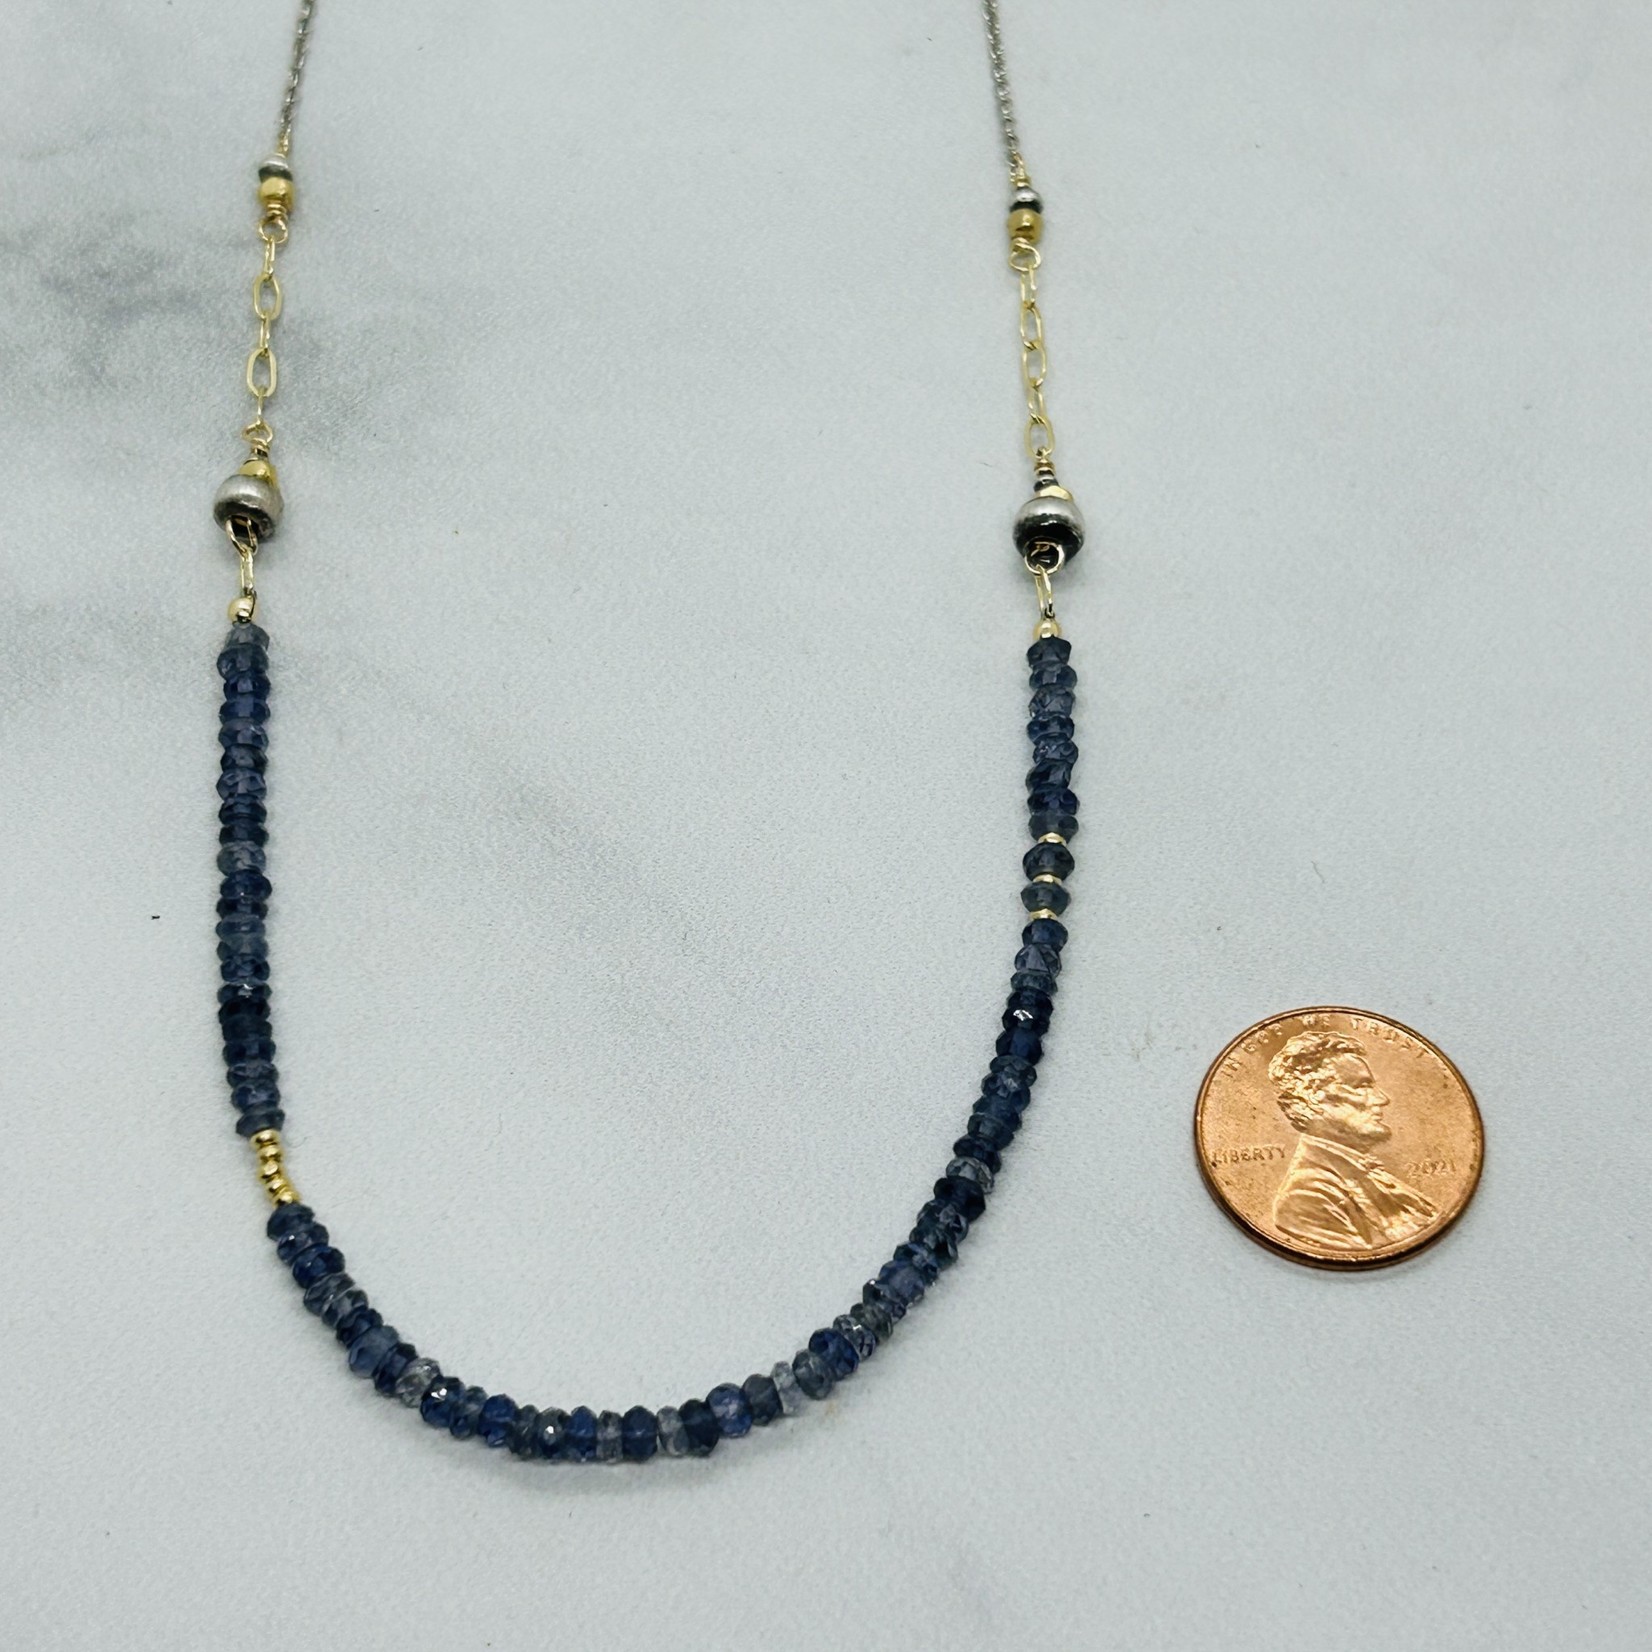 Handmade Necklace with string of faceted 4mm Iolite with sterling and 14kt gold filled chain